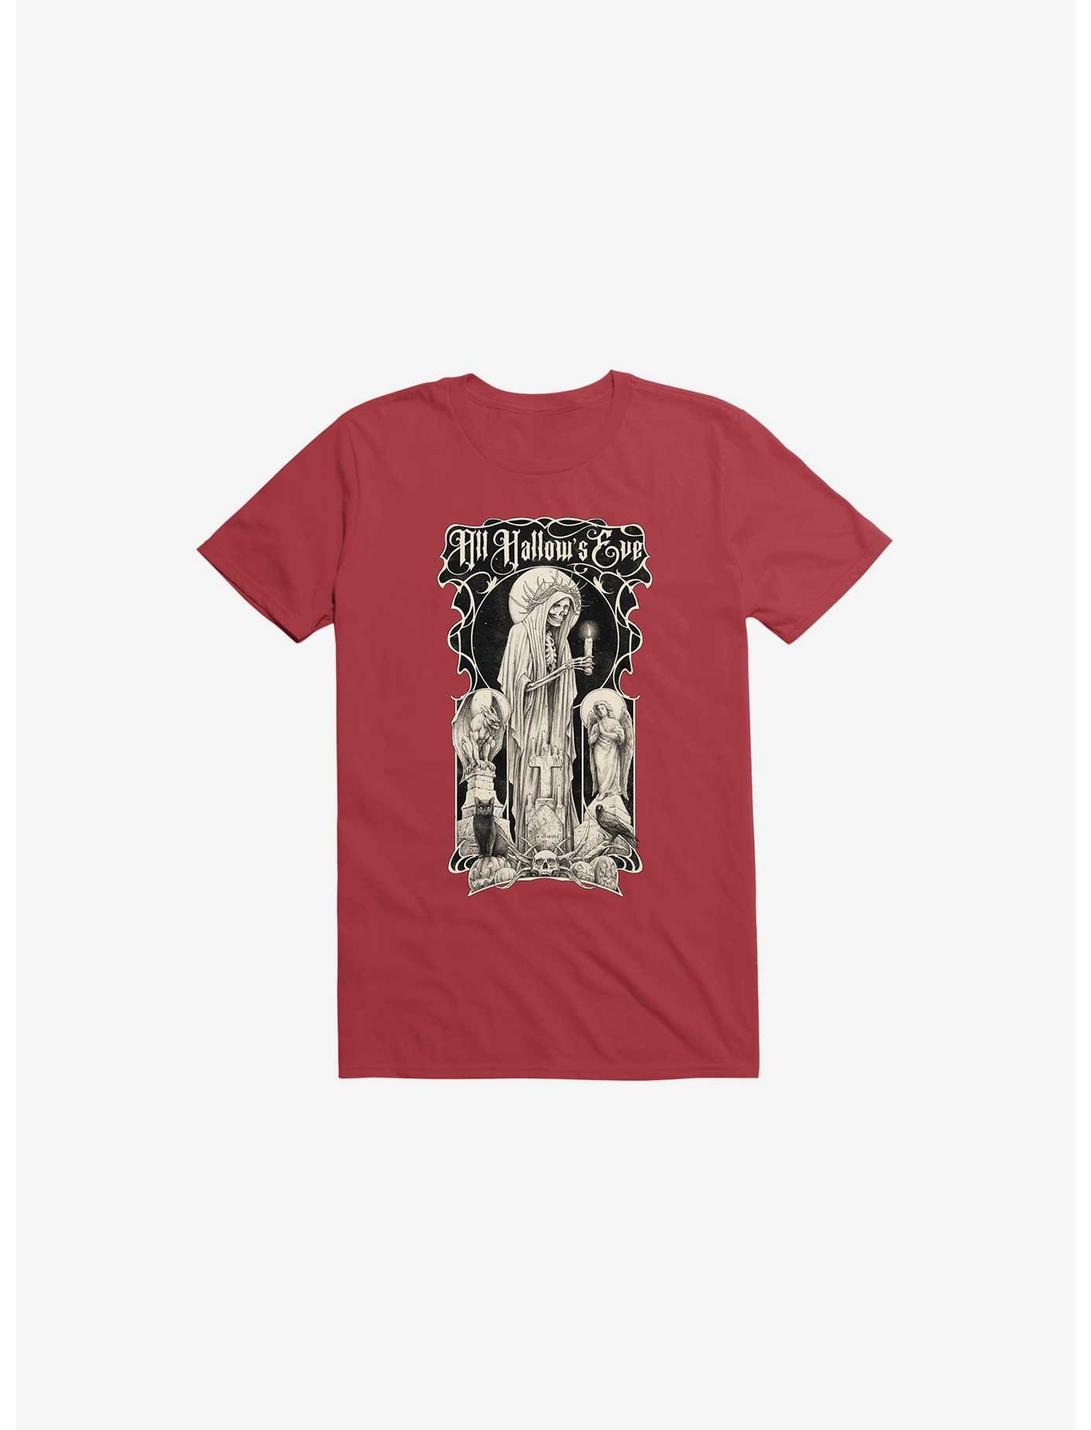 All Hallow's Eve Red T-Shirt, RED, hi-res